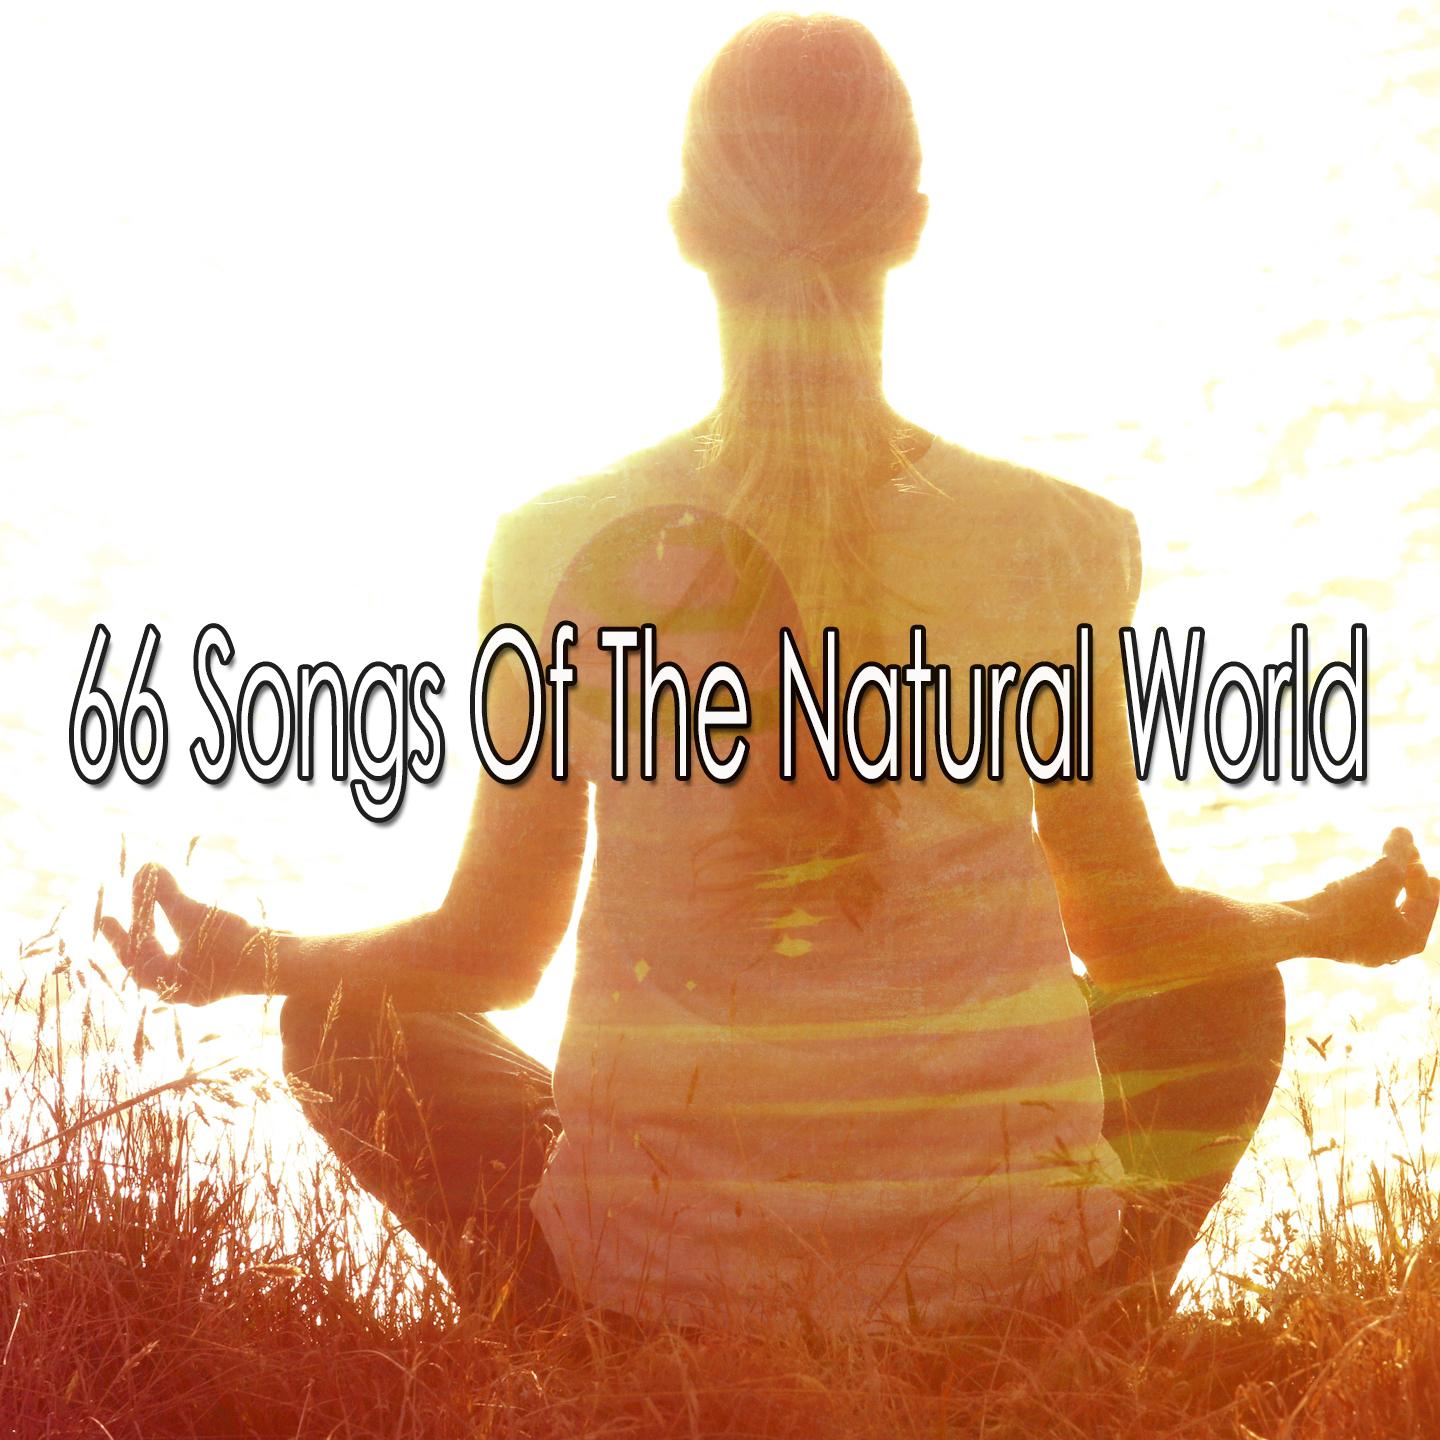 66 Songs of the Natural World